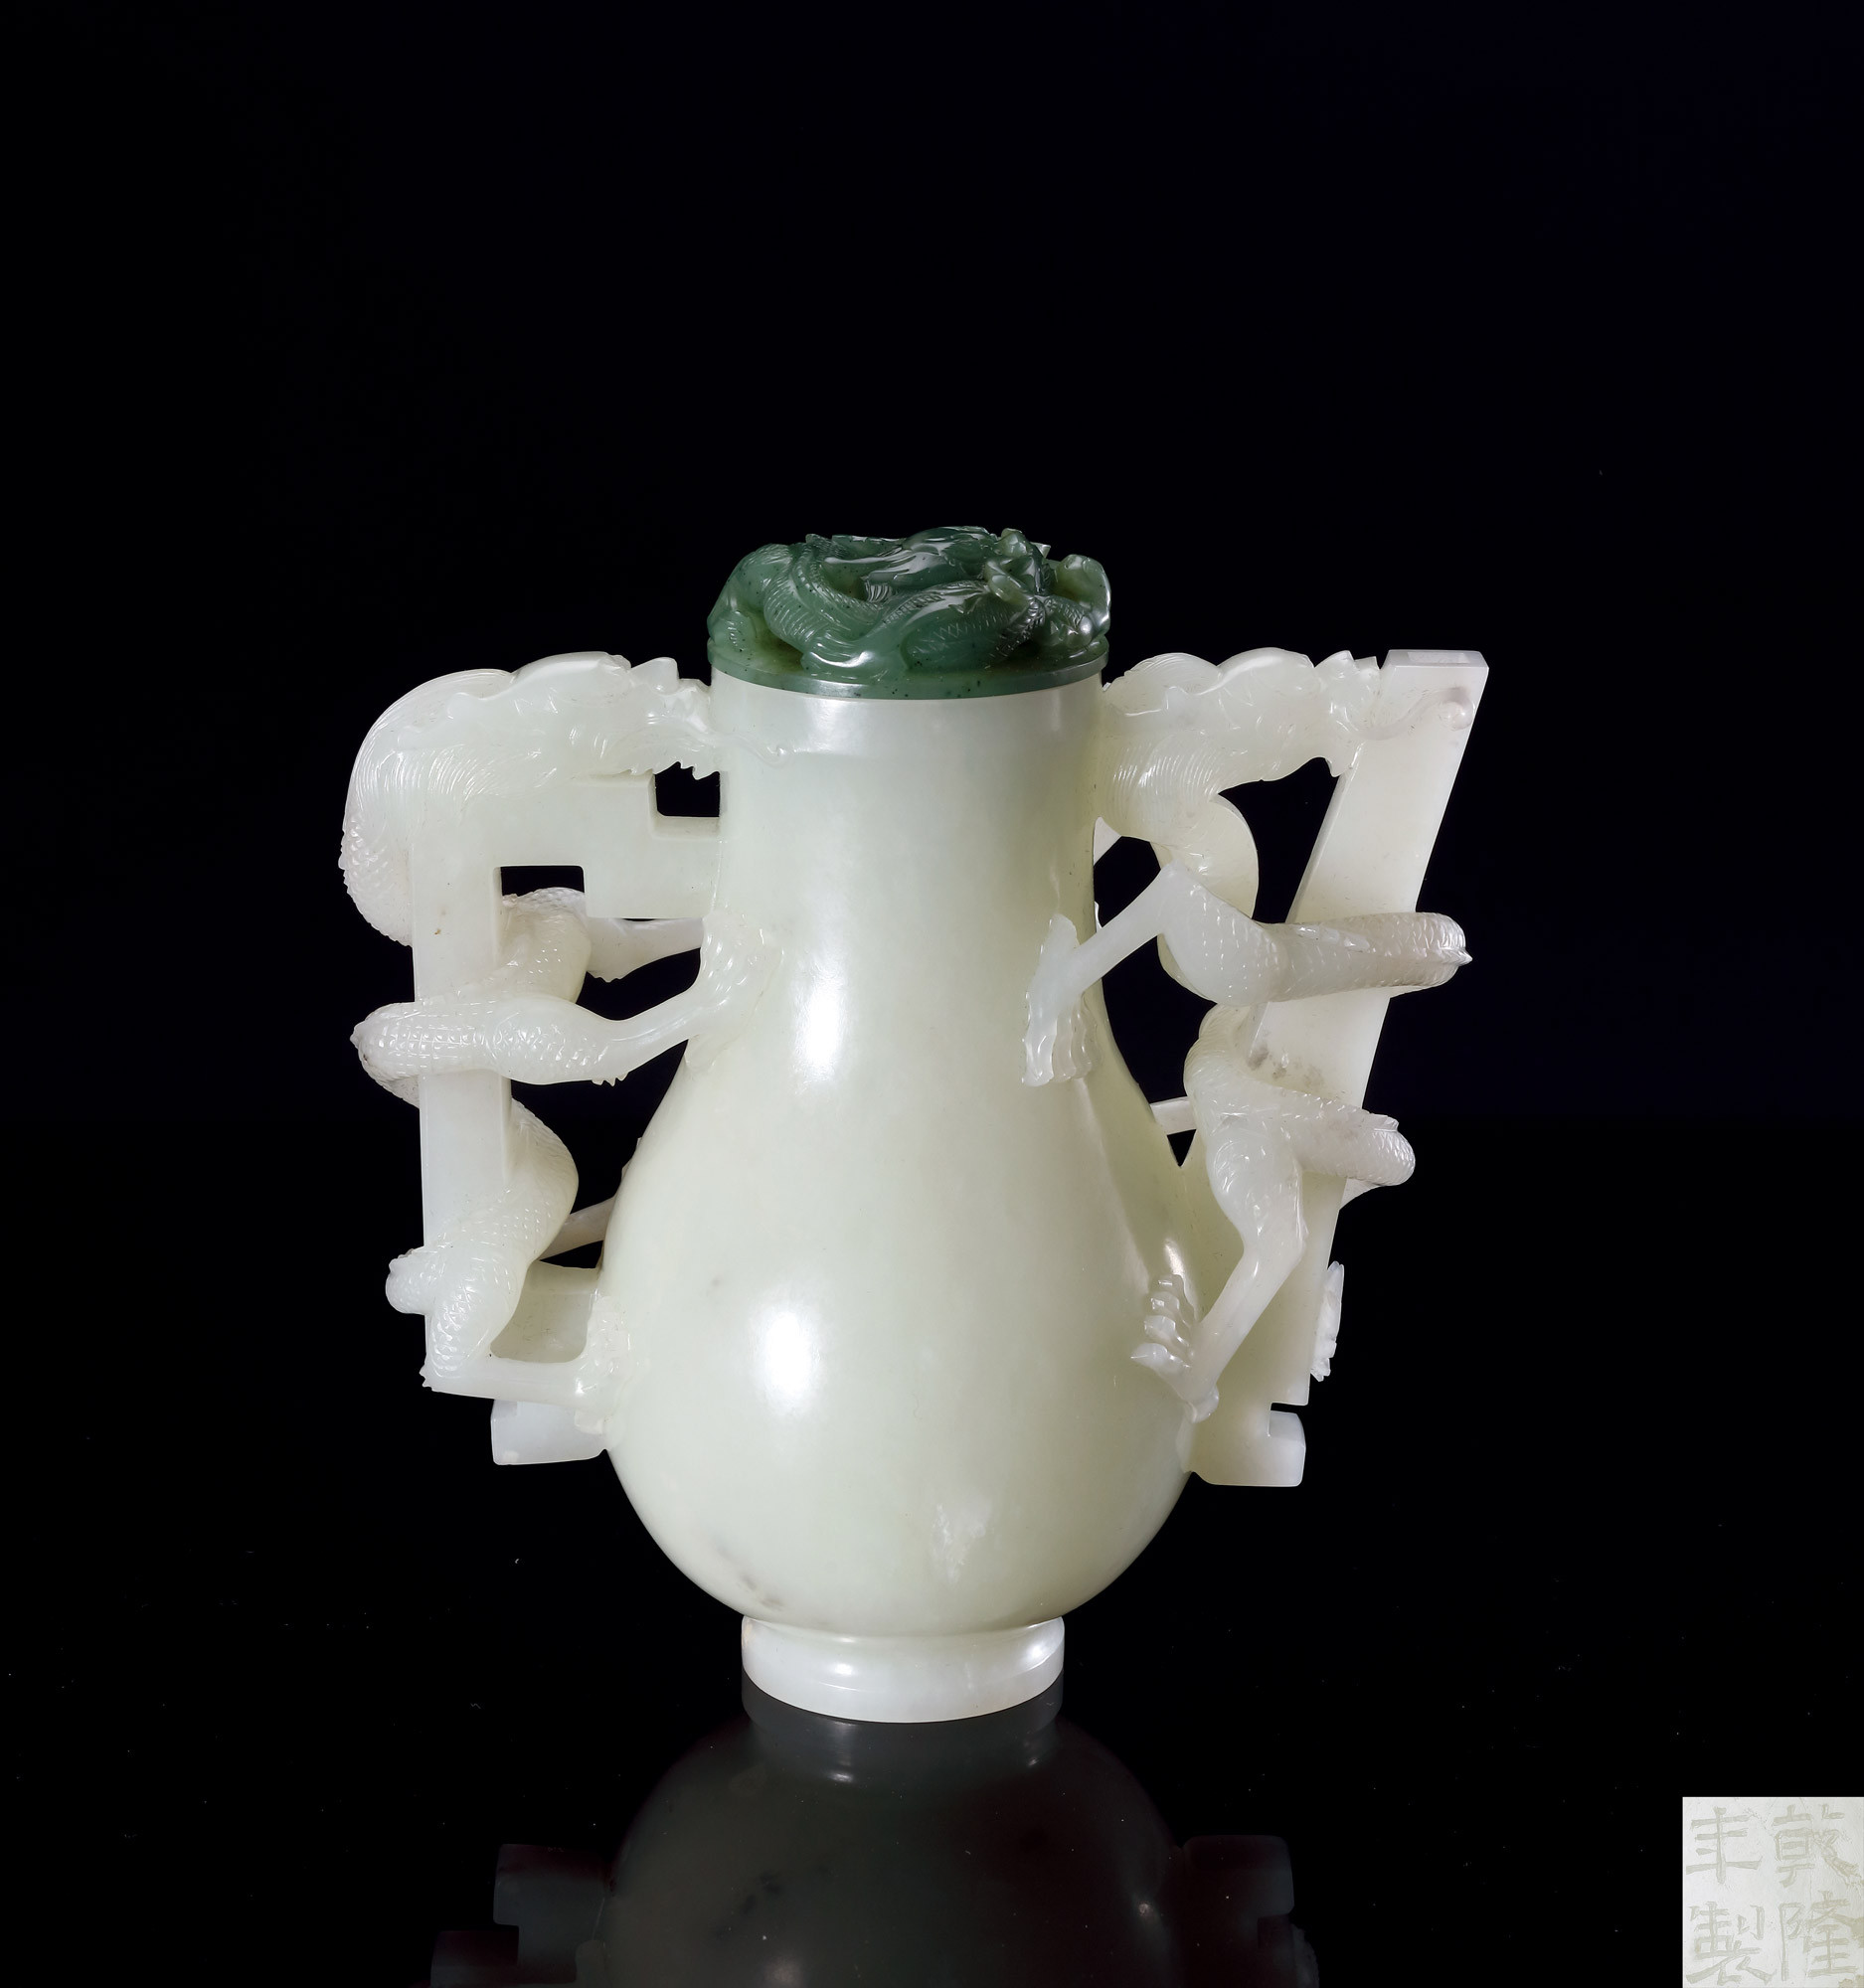 A VERY RARE IMPERIAL WHITE JADE VASE WITH DRAGONS HANDLE AND GREEN JADE COVER